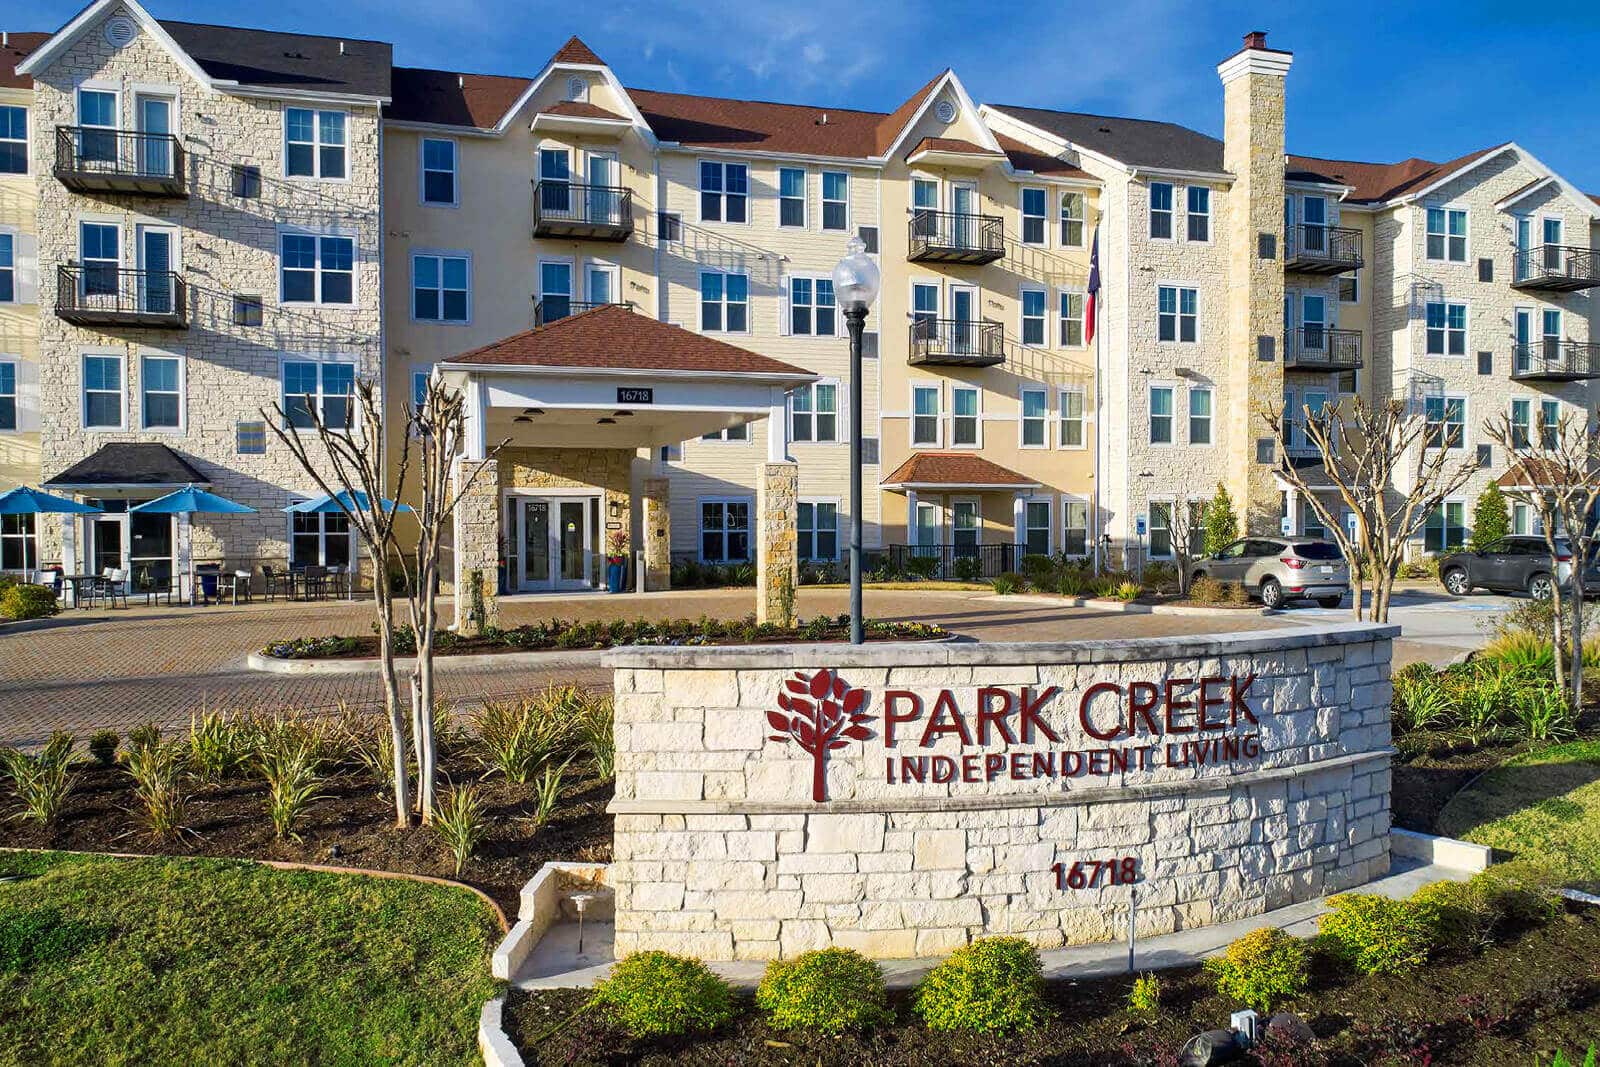 park creek entrance and sign